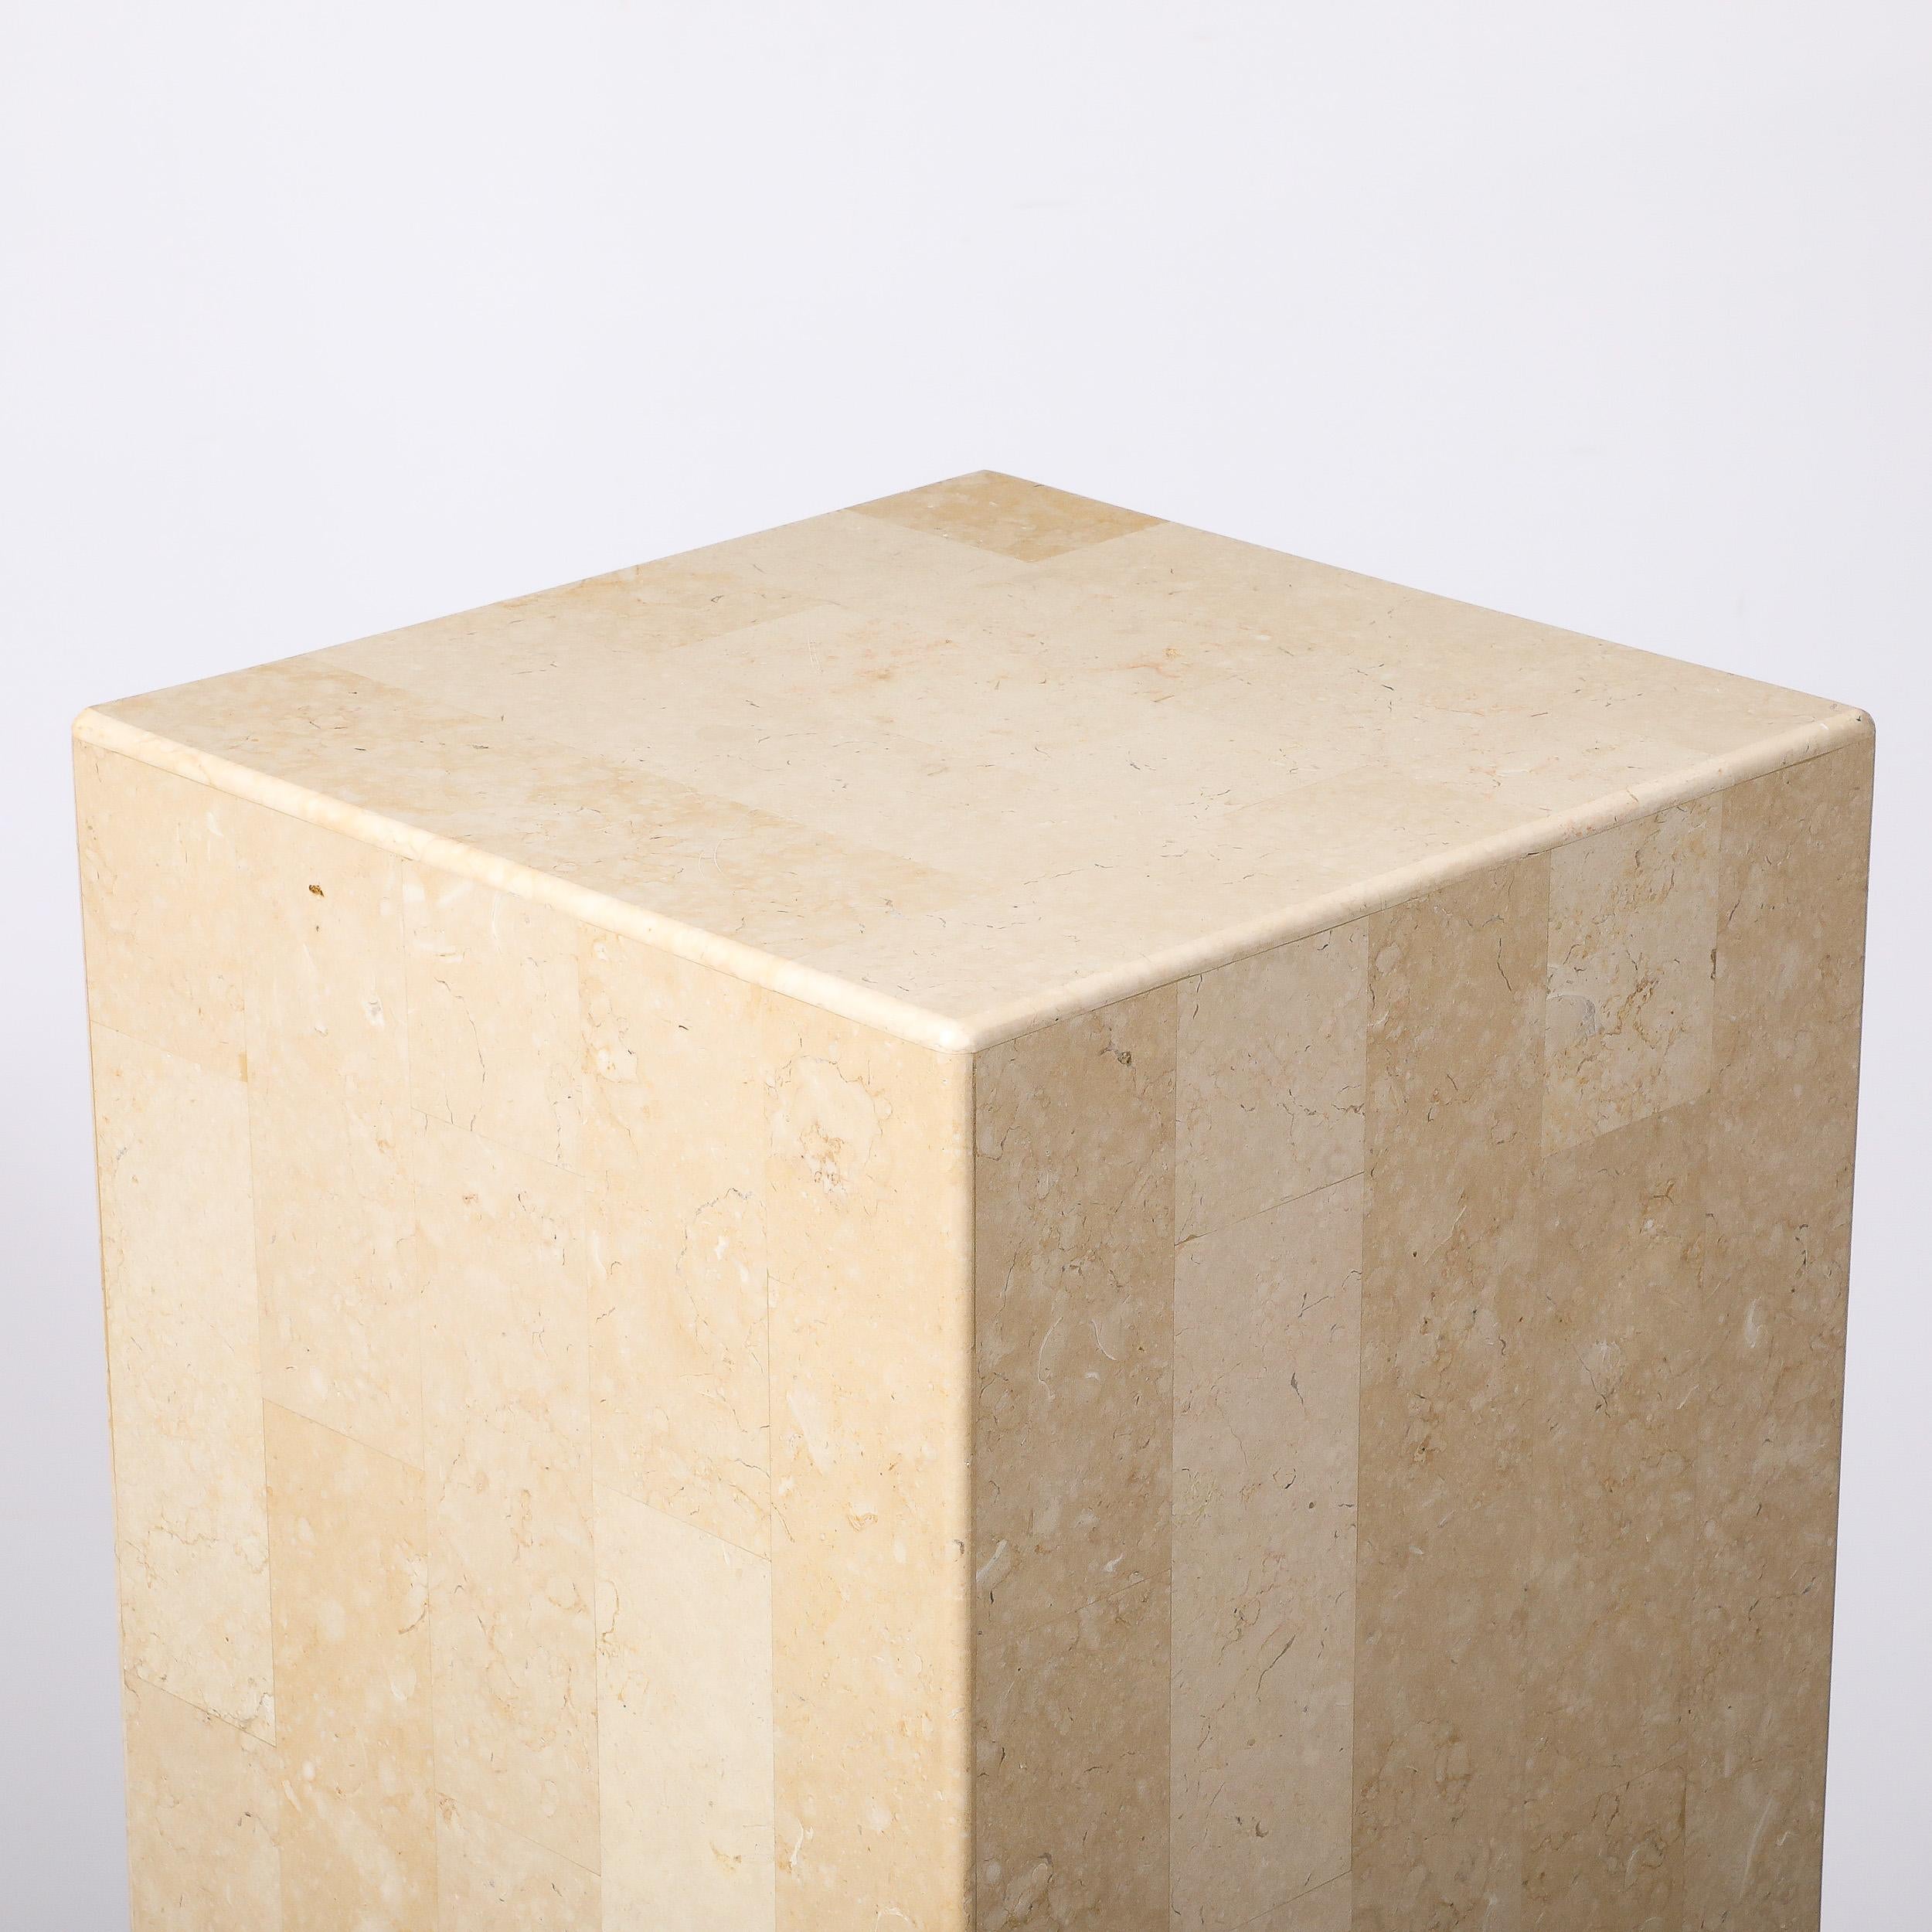 This minimal and elegant Mid-Century Modernist Tessellated Stone Pedestal is by Maitland Smith and originates from the United States, Circa 1980. It features a tall rectangular profile composed in tessellated stone, seamlessly assembled and with